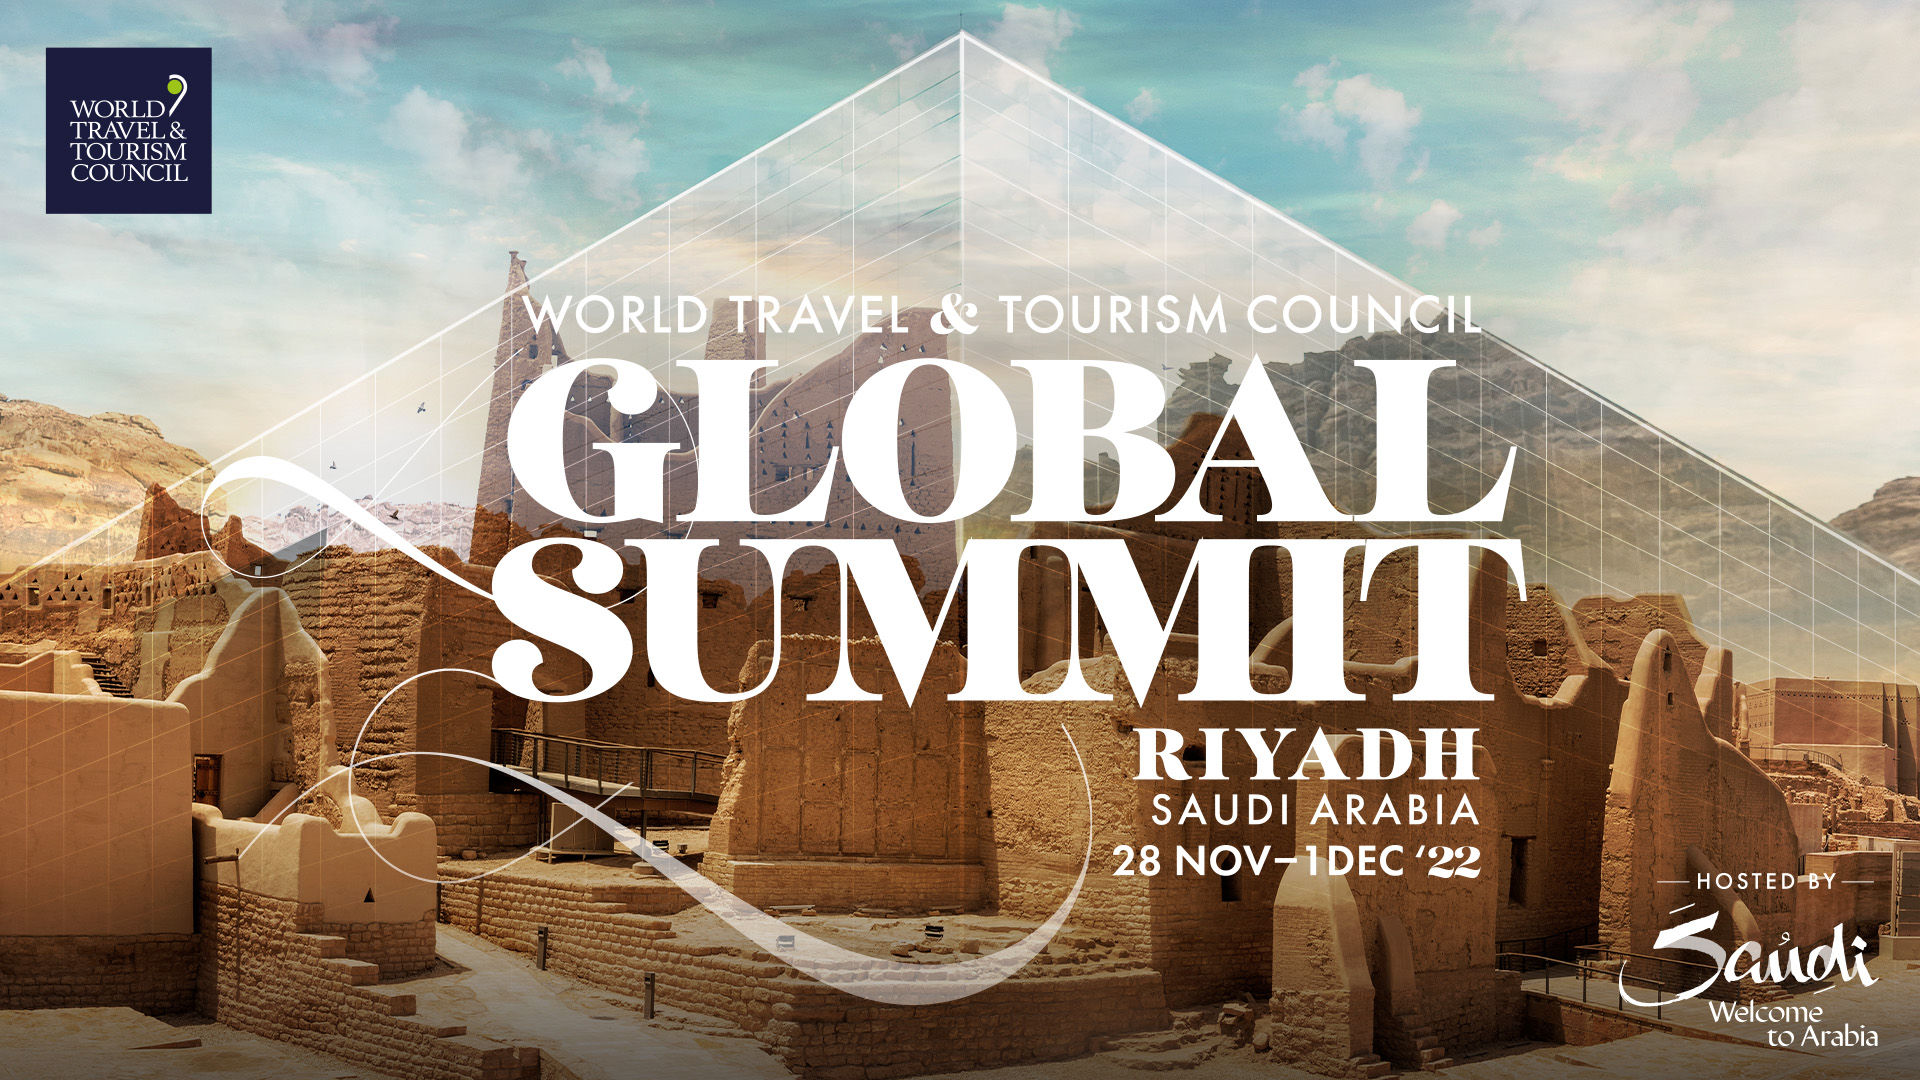 wttc world travel and tourism council